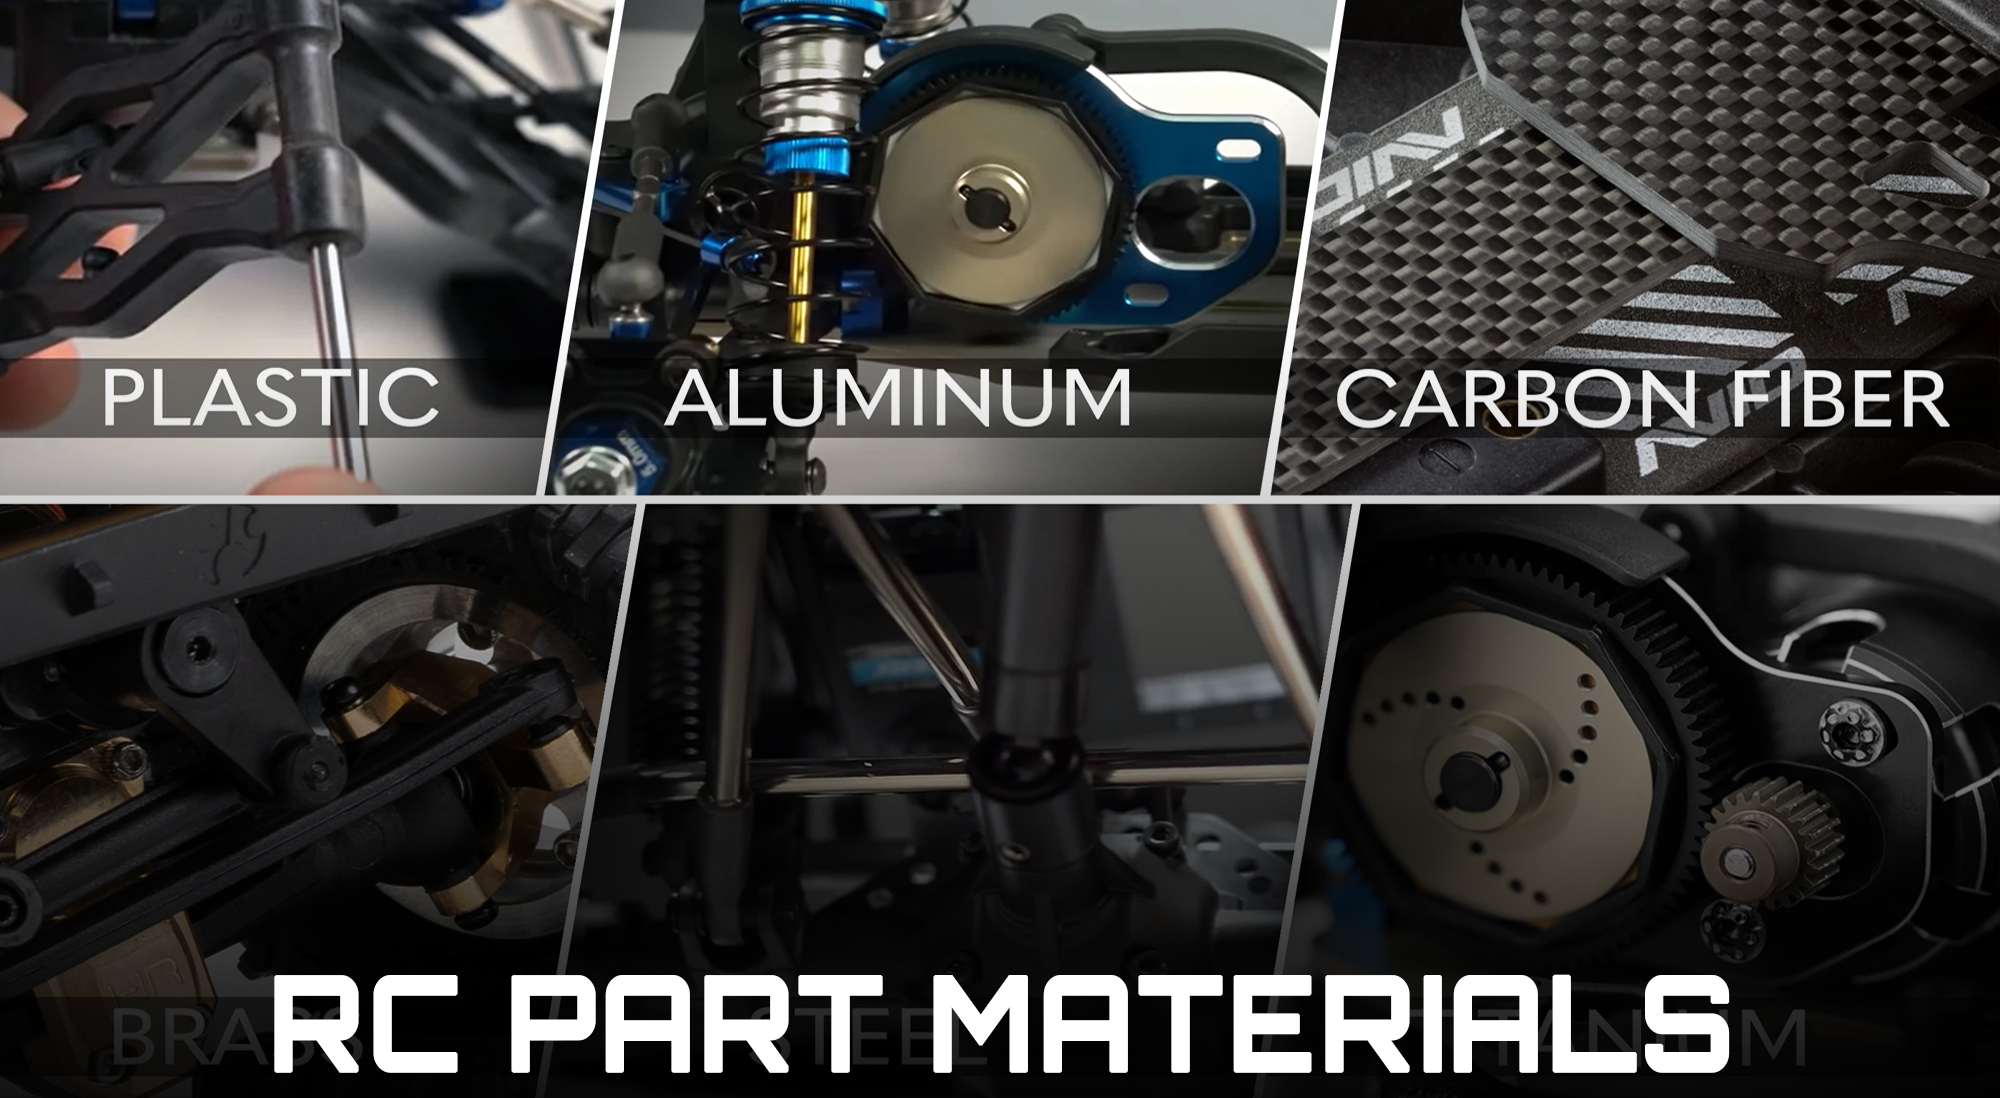 RC Parts Materials from Plastic to Metal